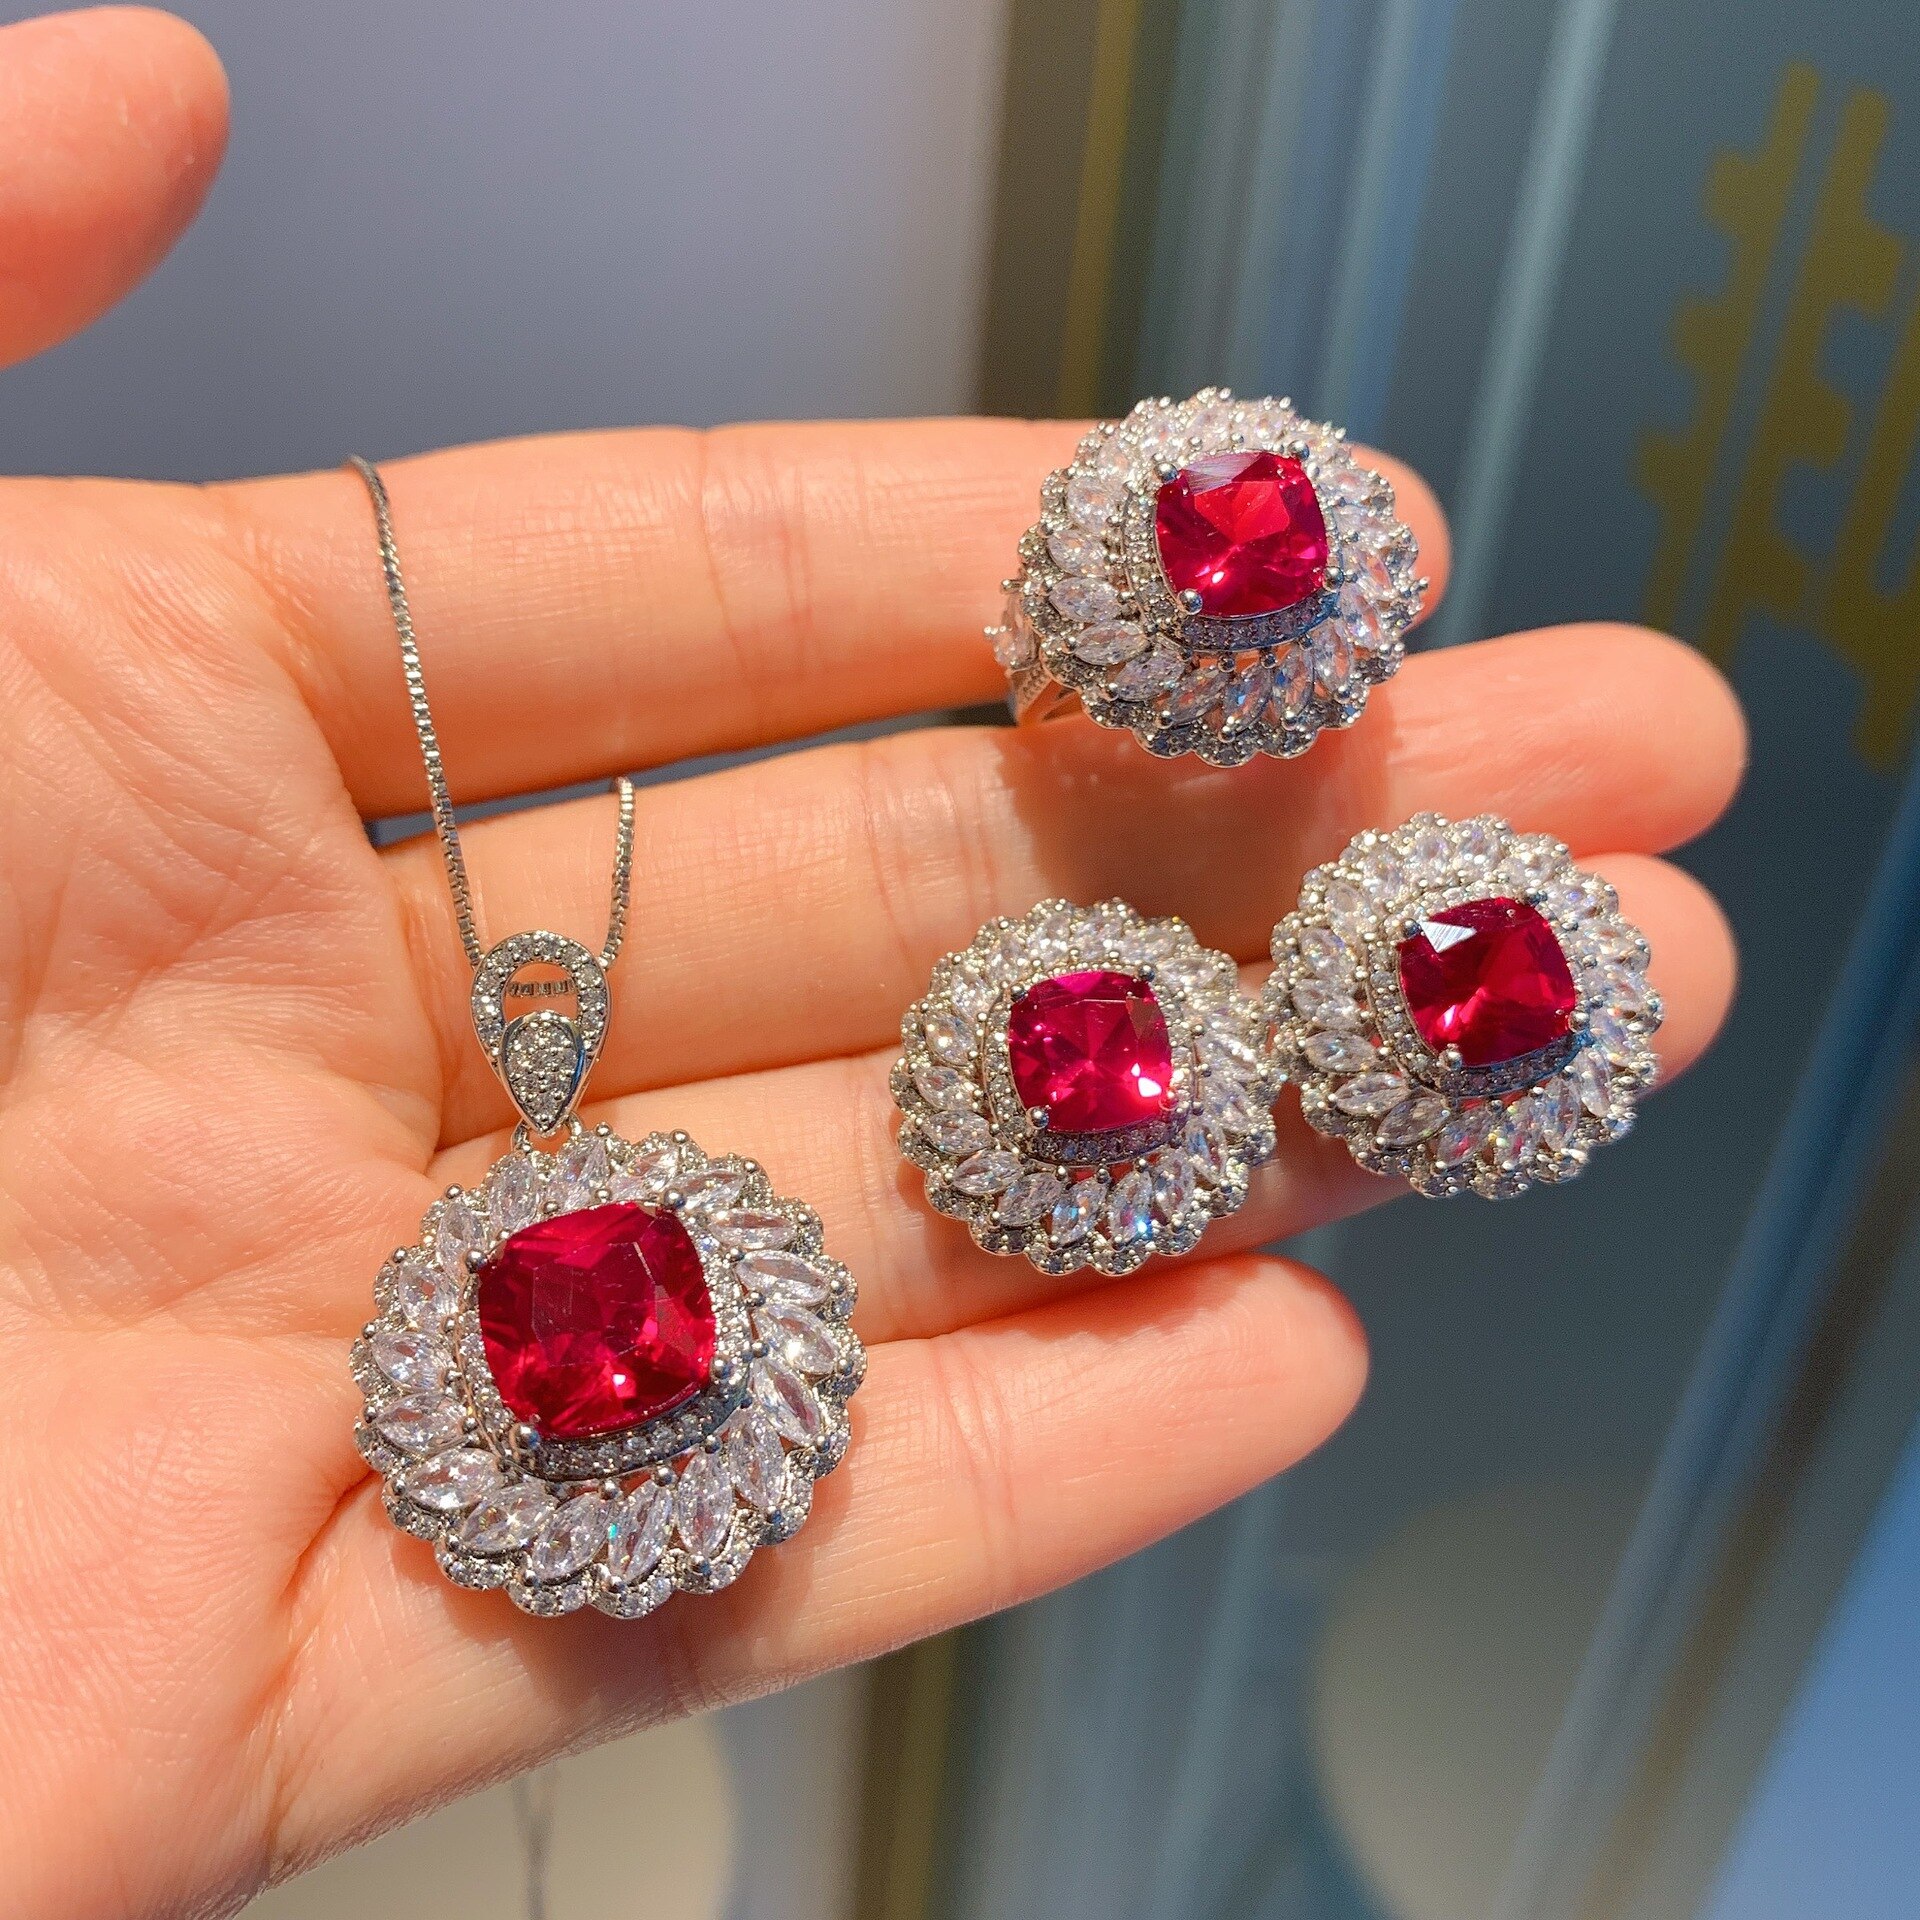 Original-925-Sterling-Silver-Rings-Retro-Red-Crystal-Zircon-Square-Pendant-Earring-Necklace-Jewelry-Set-Women.jpg